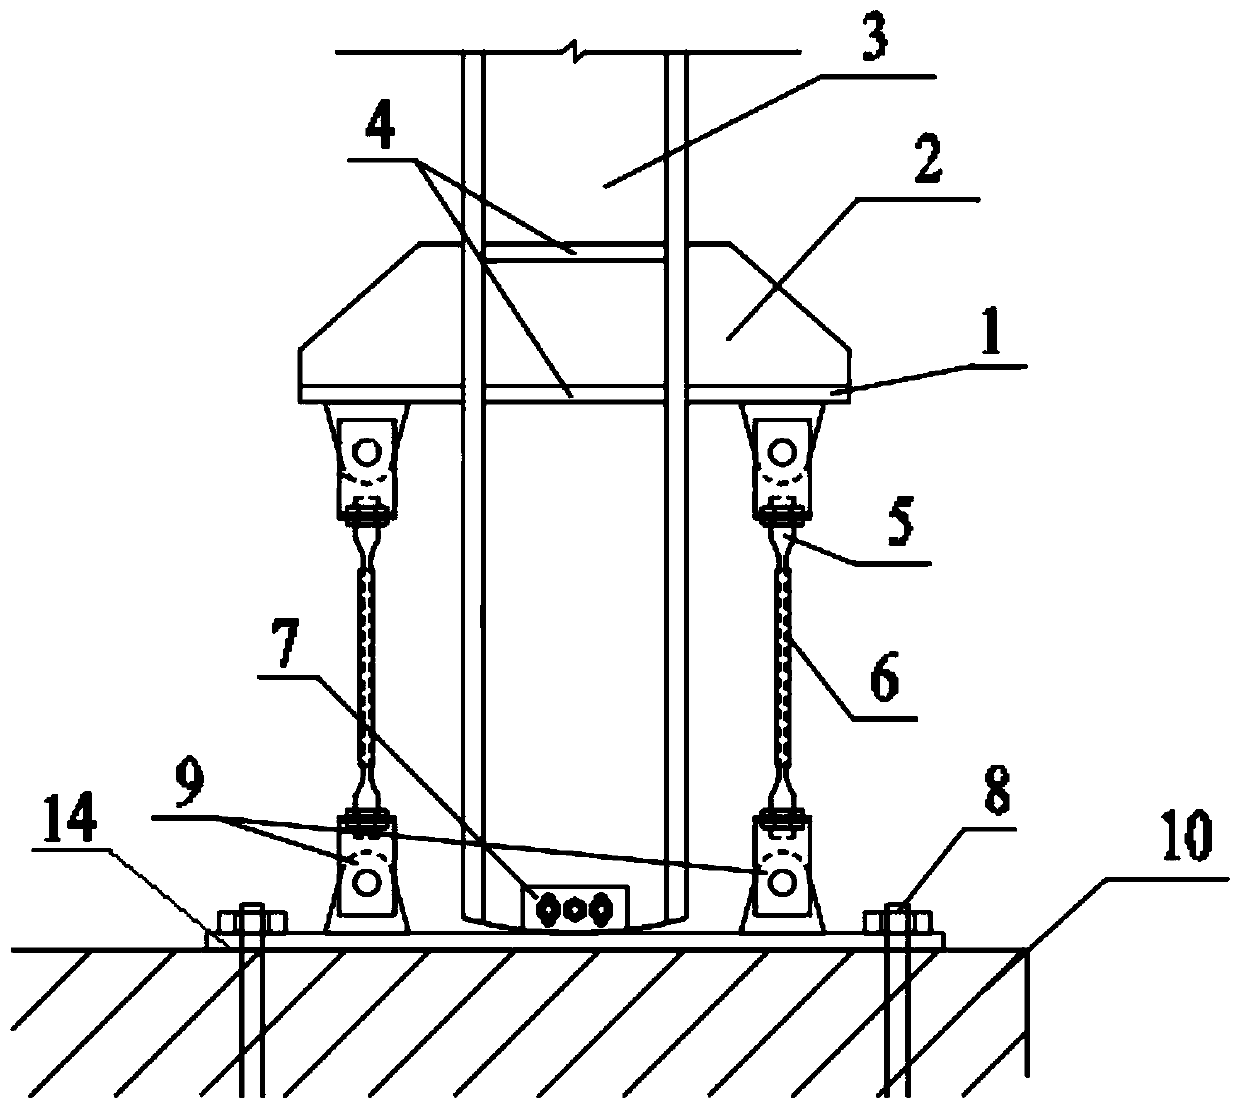 Self-resetting column base joints and steel structure buildings based on shape memory alloy rods